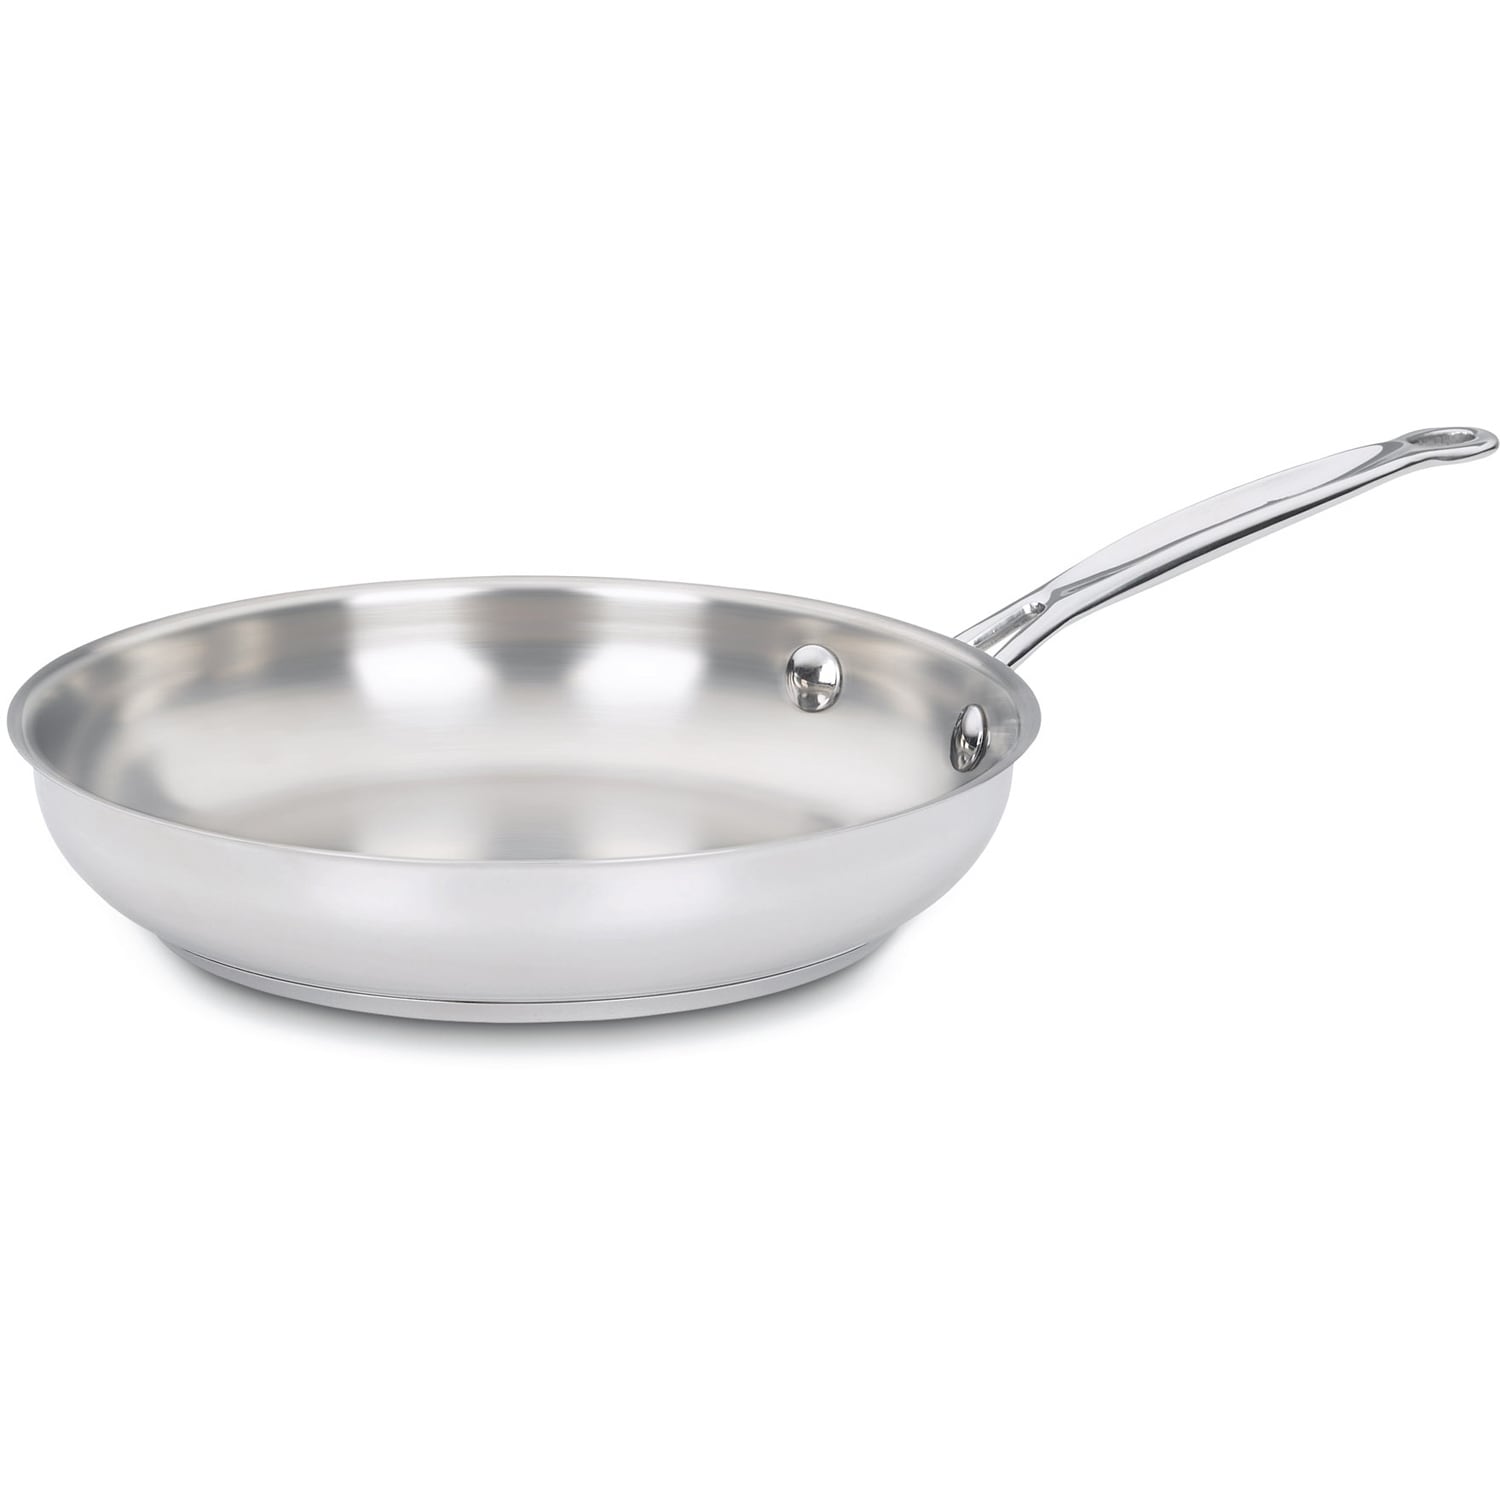 https://ak1.ostkcdn.com/images/products/8338564/Cuisinart-Chefs-Classic-Stainless-9-Skillet-82d87955-1399-468a-bd6d-6a8beb0c6125.jpg